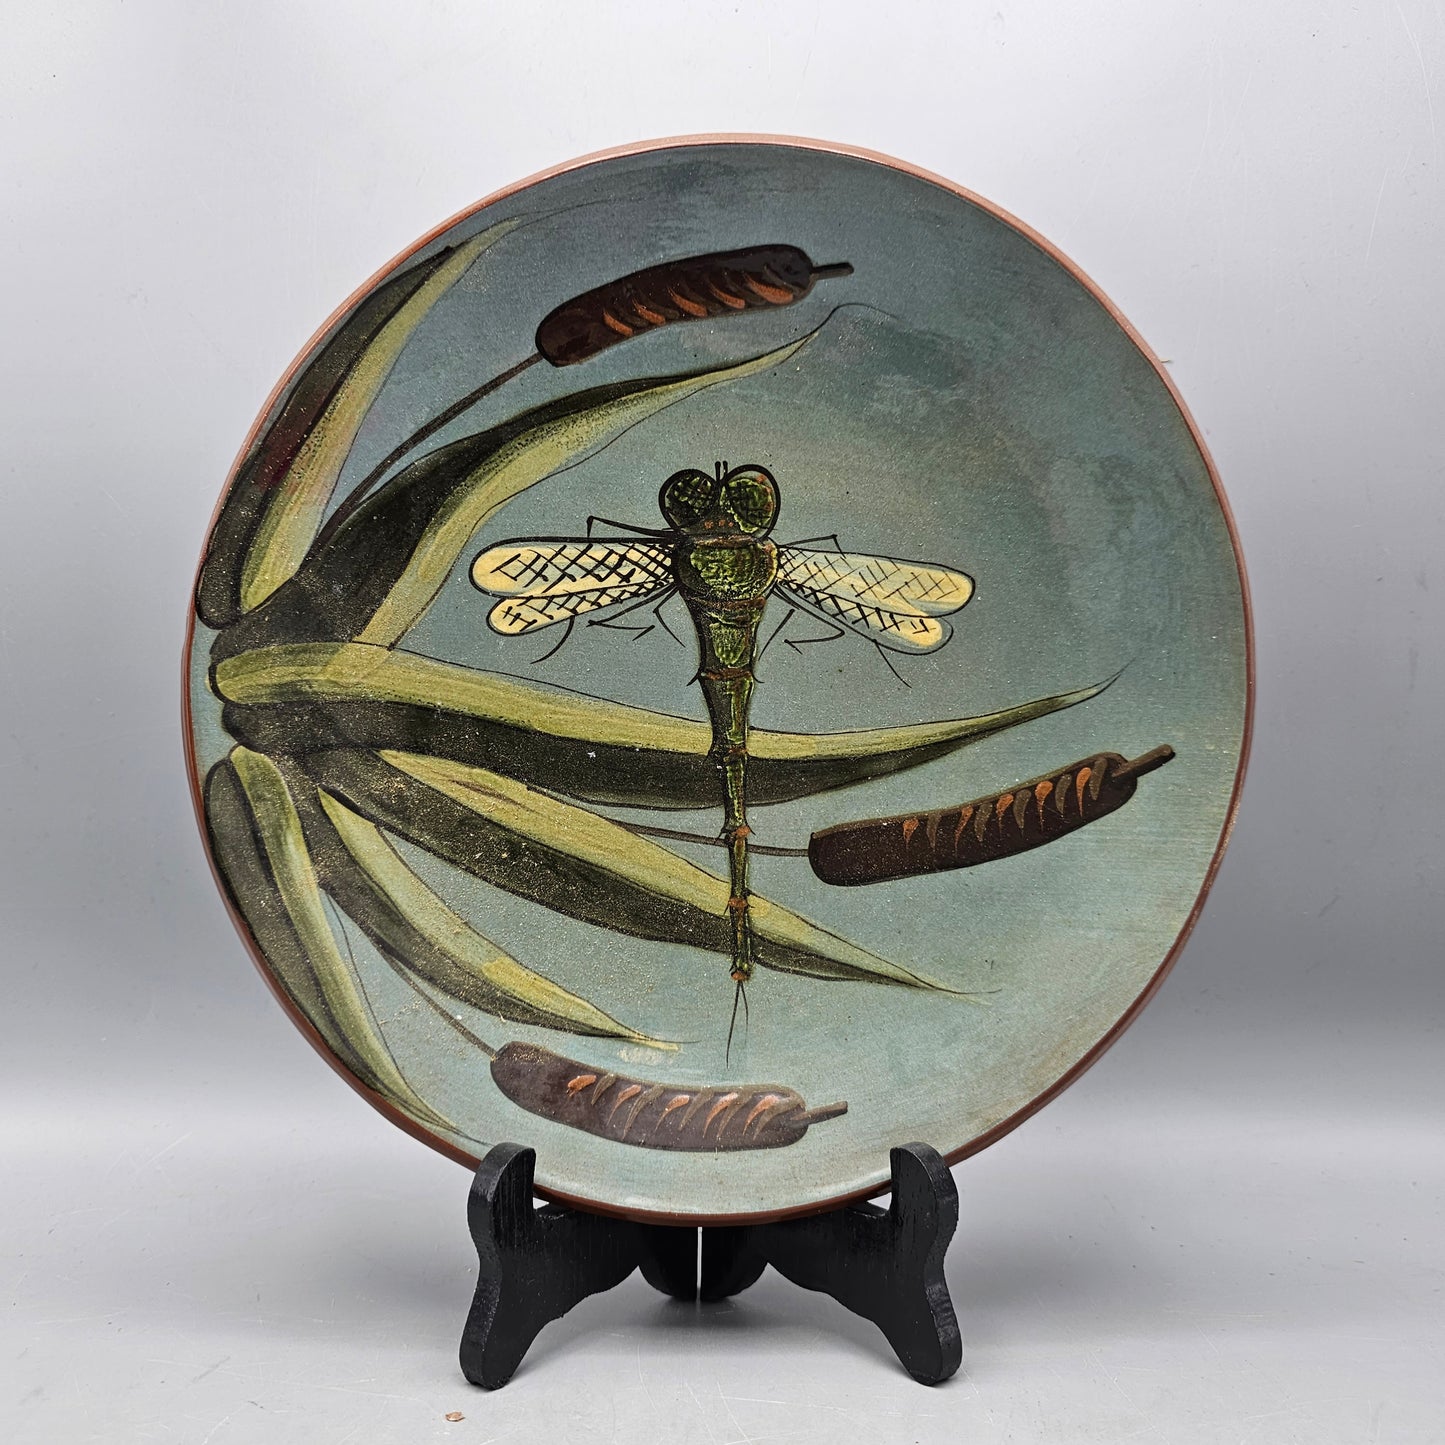 Signed Eldreth Studio Art Pottery Plate with Dragonfly